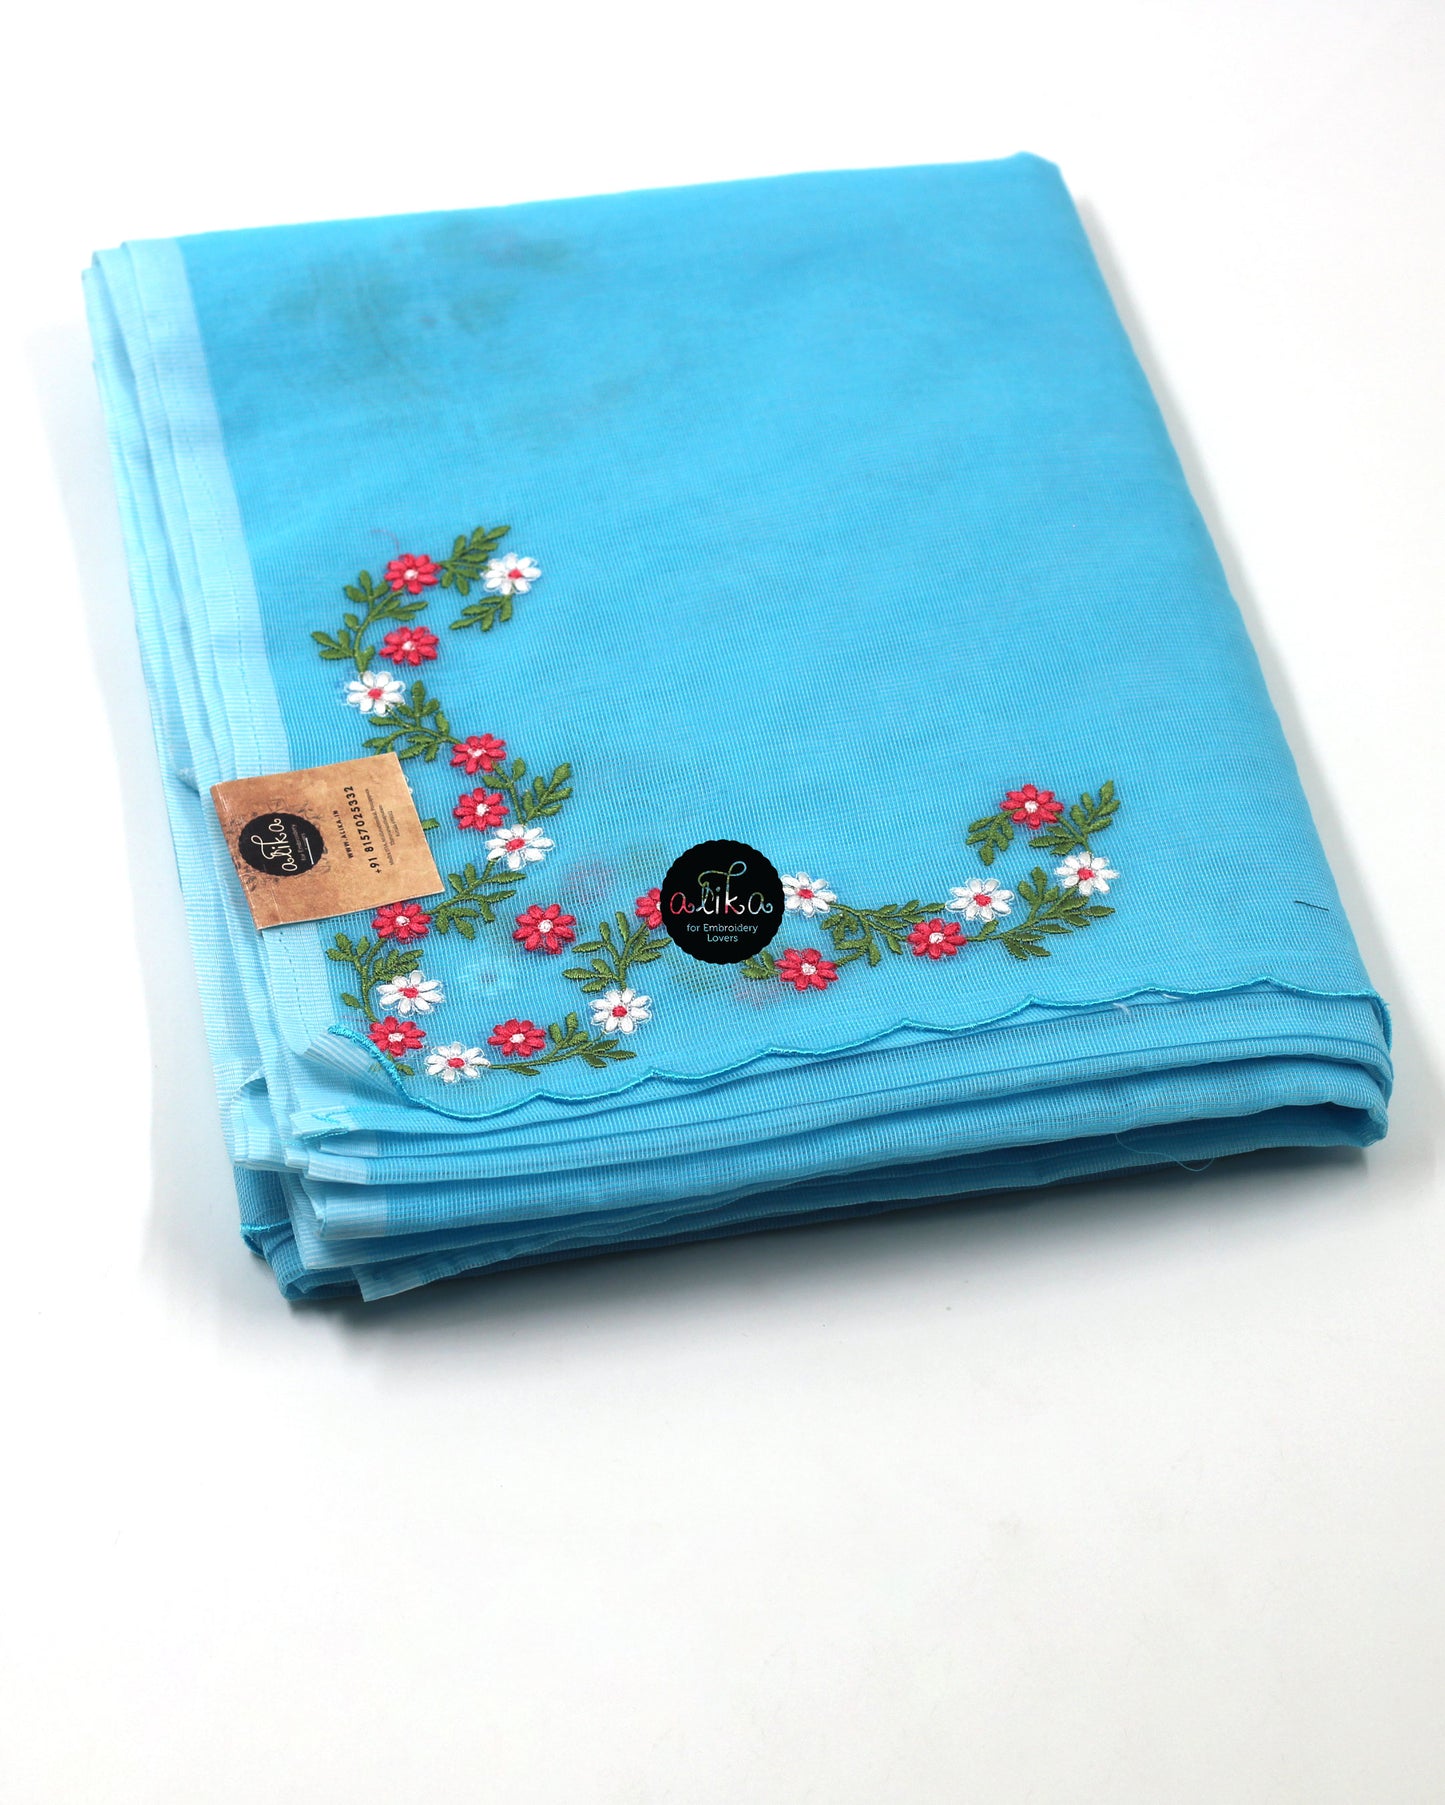 Blue silky Kota saree with floral embroidery